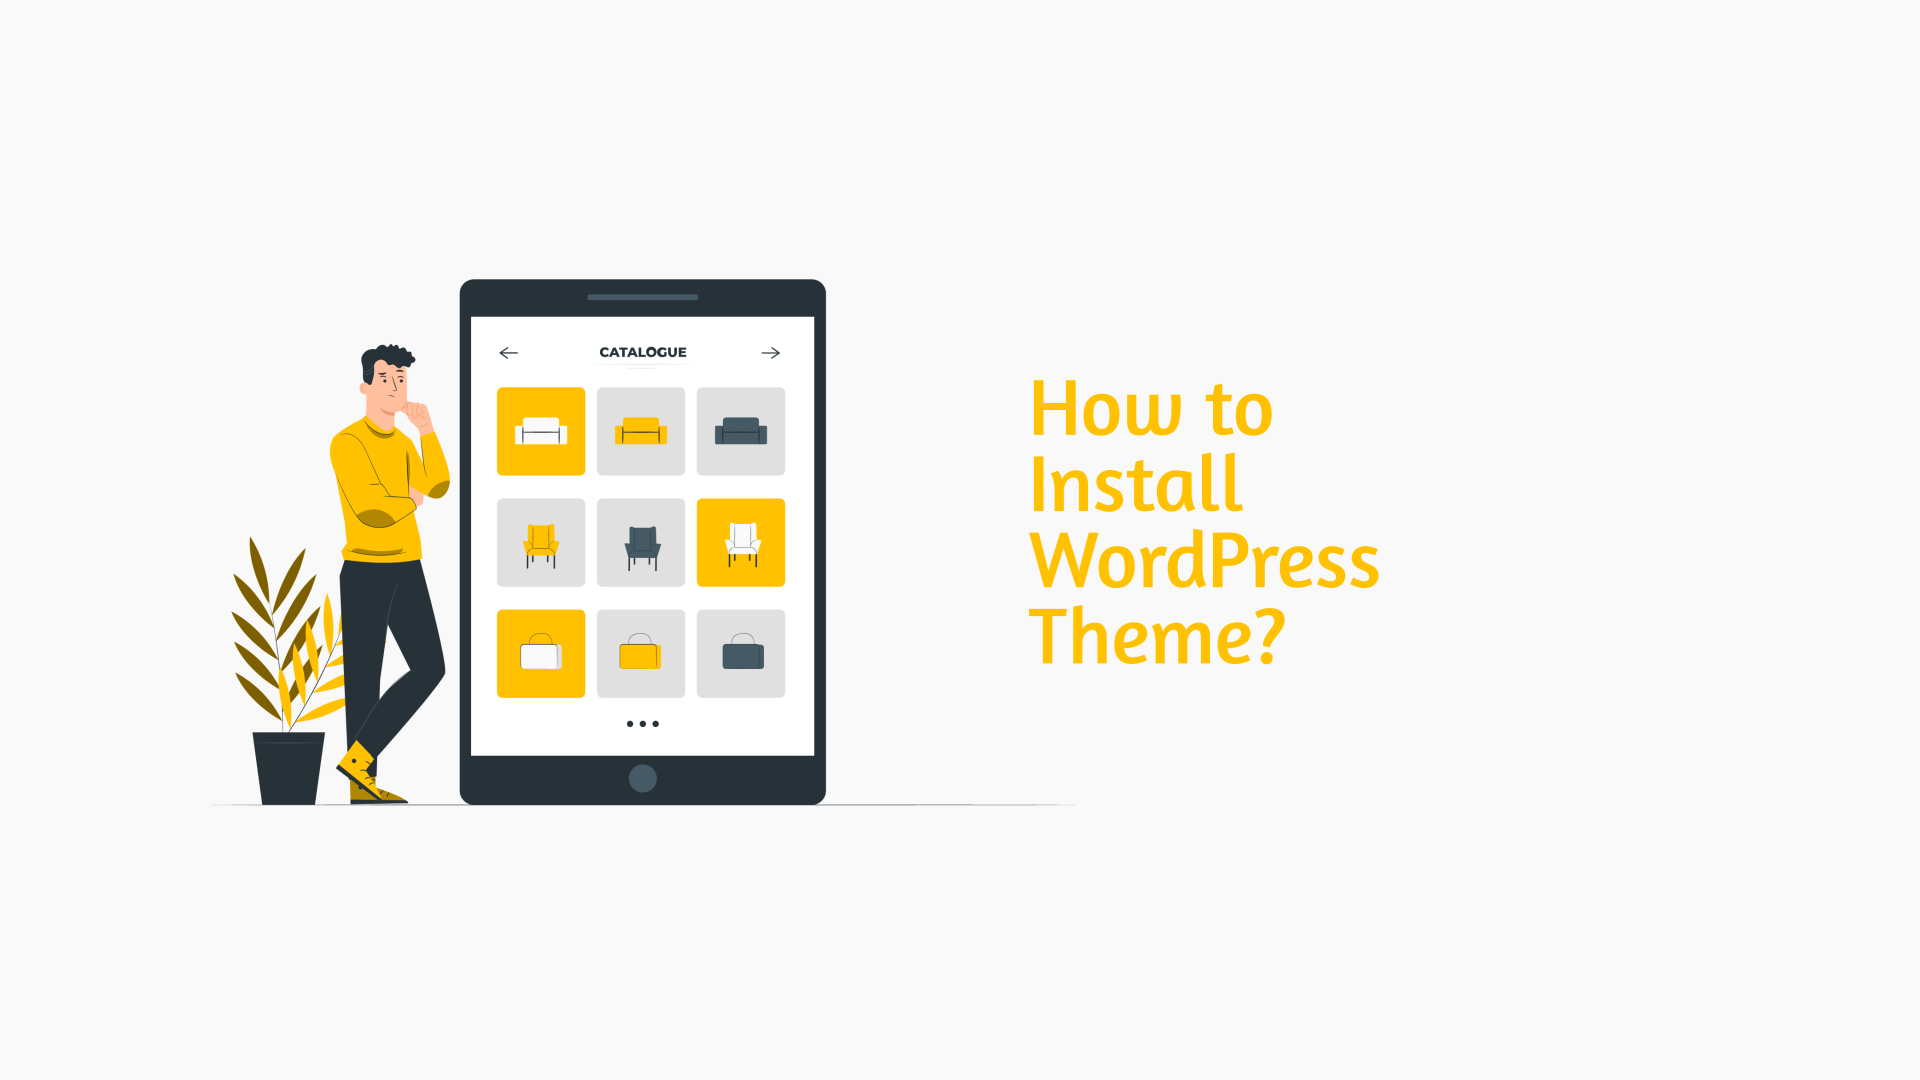 How to Install WordPress Themes?